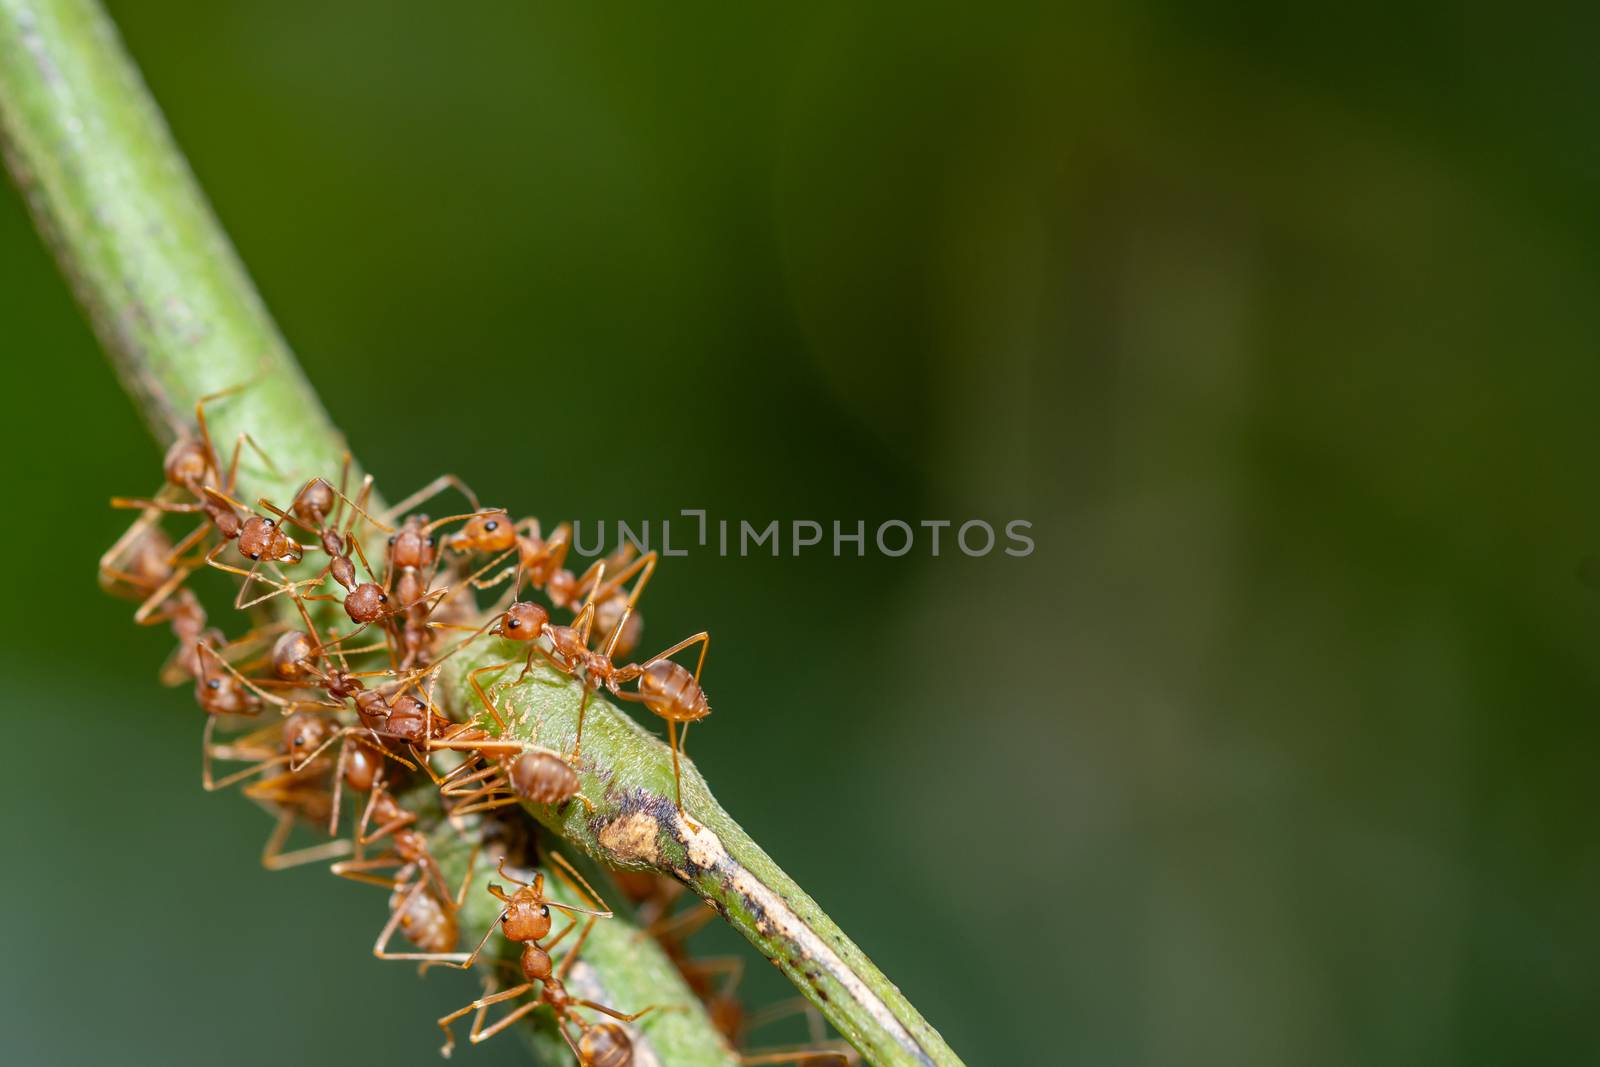 Red Ant on the Branch